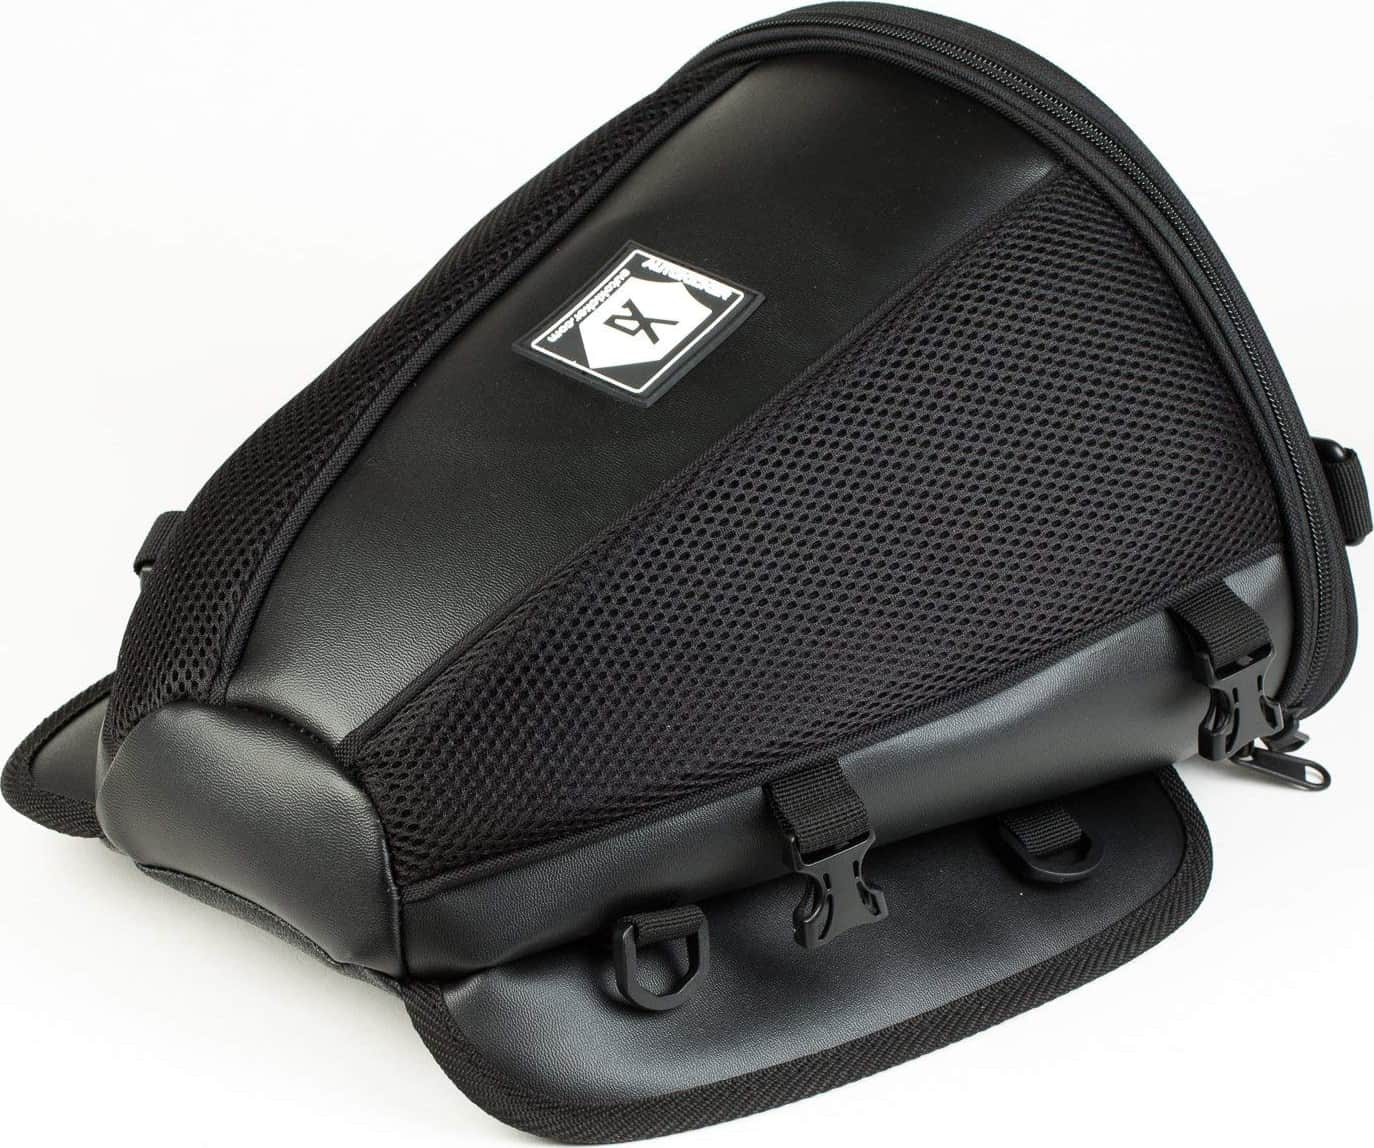 Seat Bag For Motorcycle & Motorbikes Autokicker Essential Collection Mini Tail Pack 